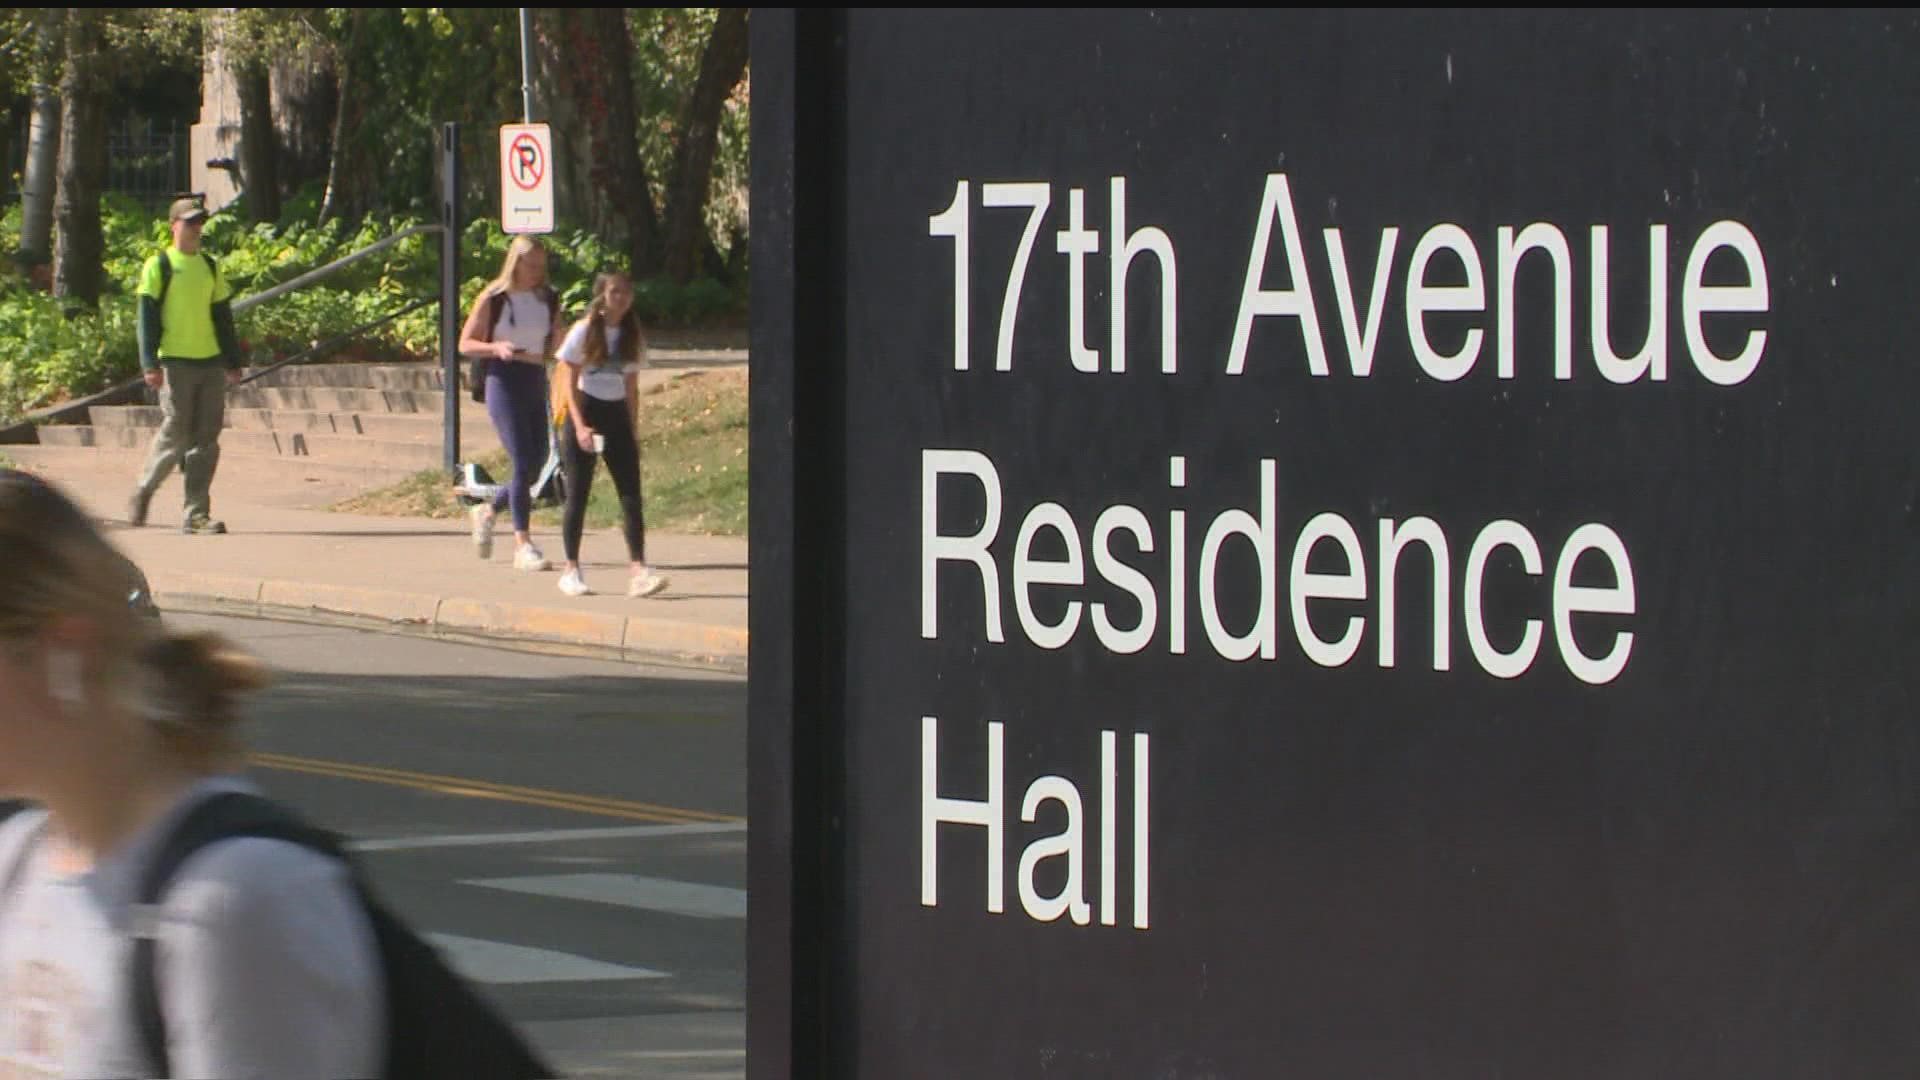 Students living in the 17th Avenue Residence Hall may need to be relocated while their rooms are cleaned on Thursday.